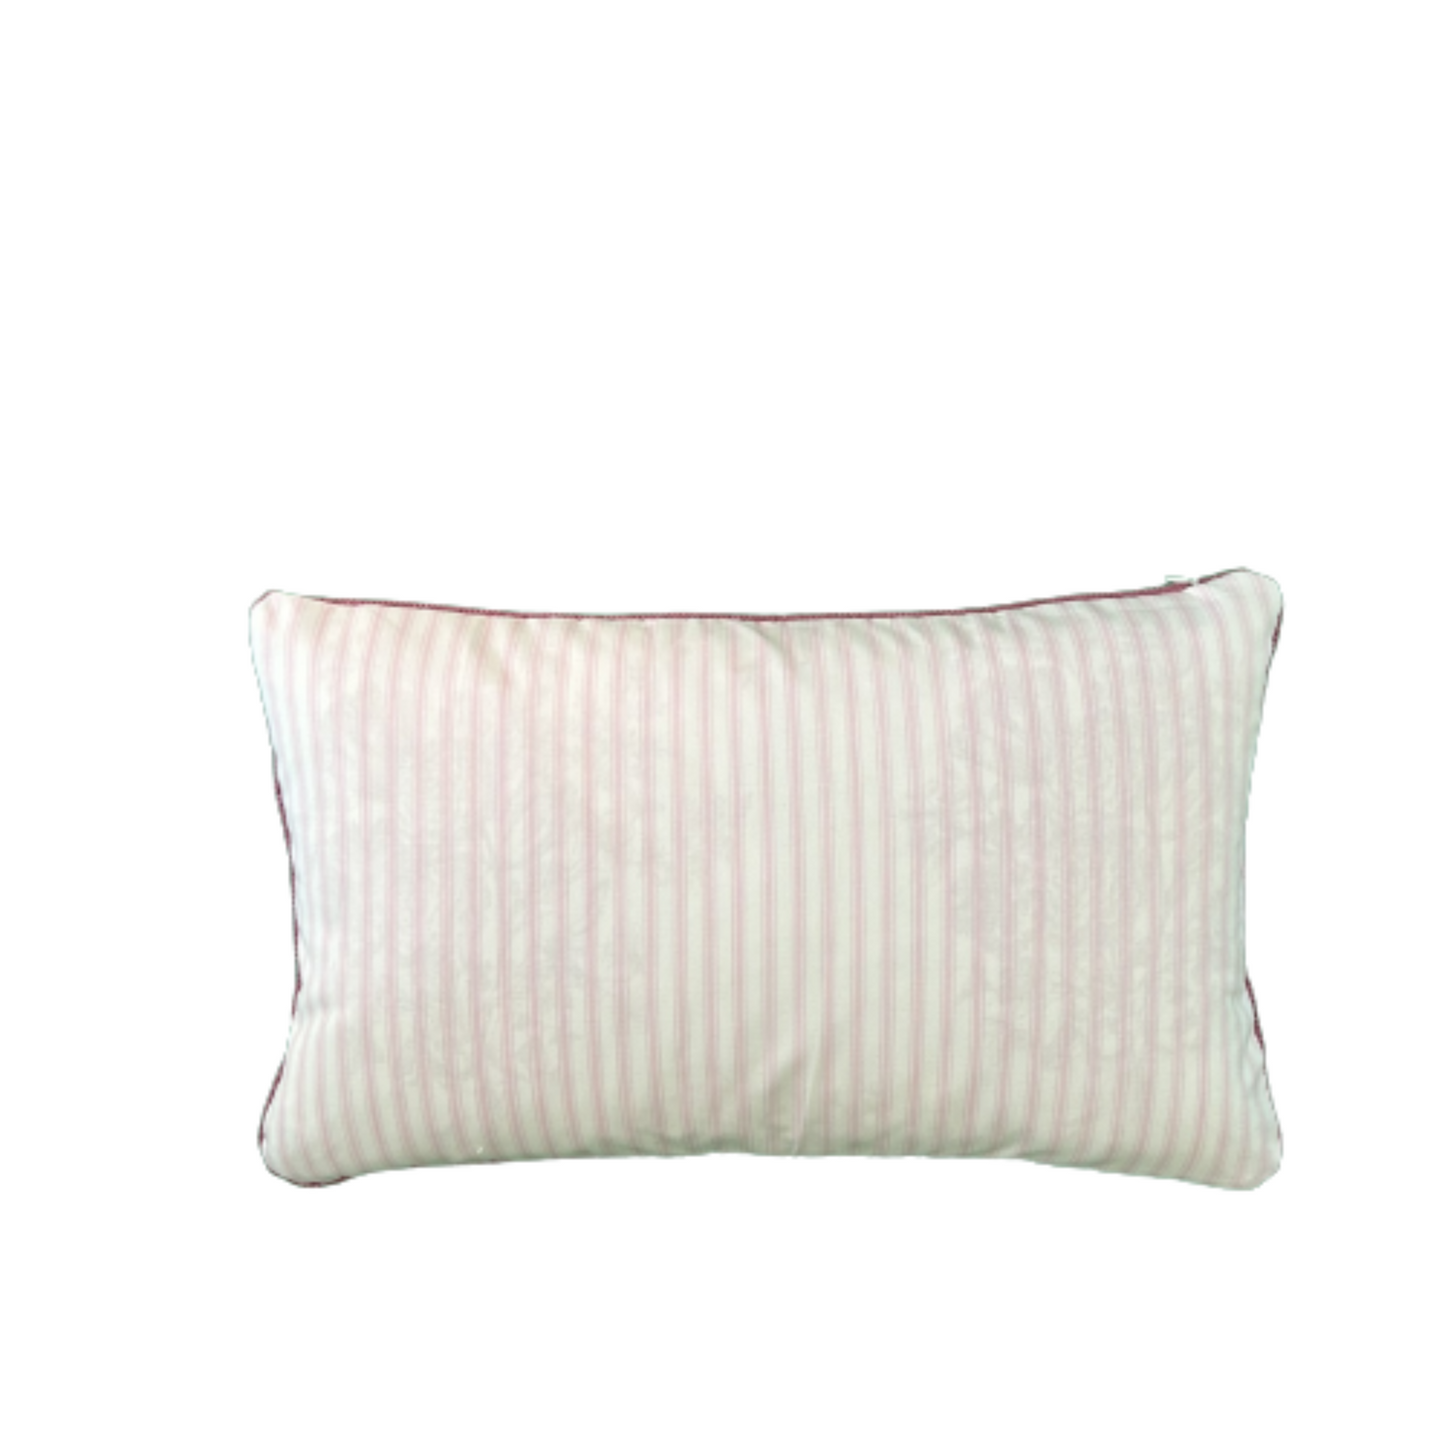 Augusta on Ticking Sister Parish 14 x 24 Decorative PIllow with Down Feather Insert